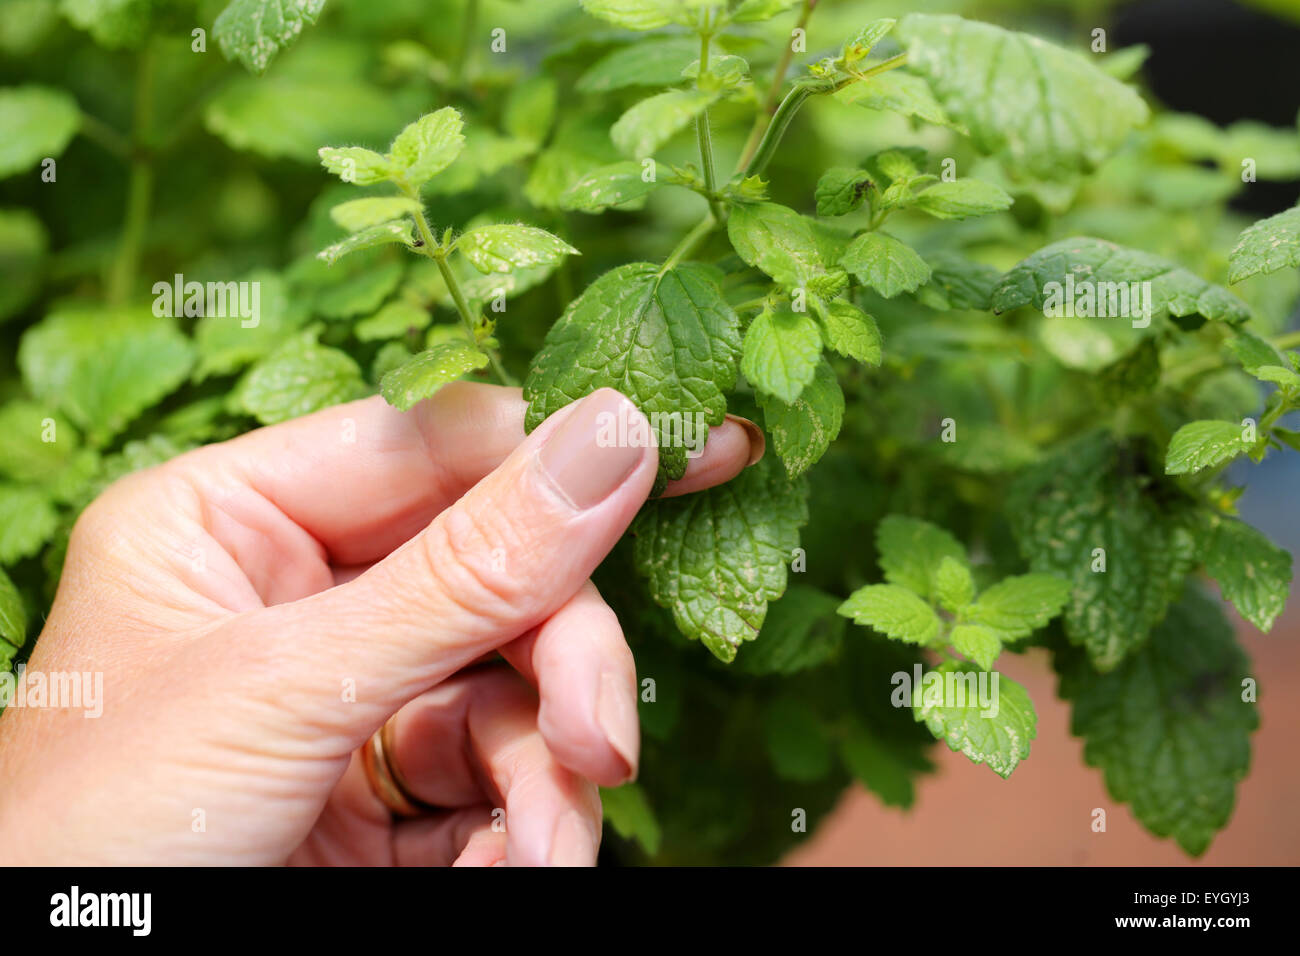 A woman rubbing the leaves of a Lemon Balm herb plant between  two fingers to release the scent from the crushed plants leaves Stock Photo